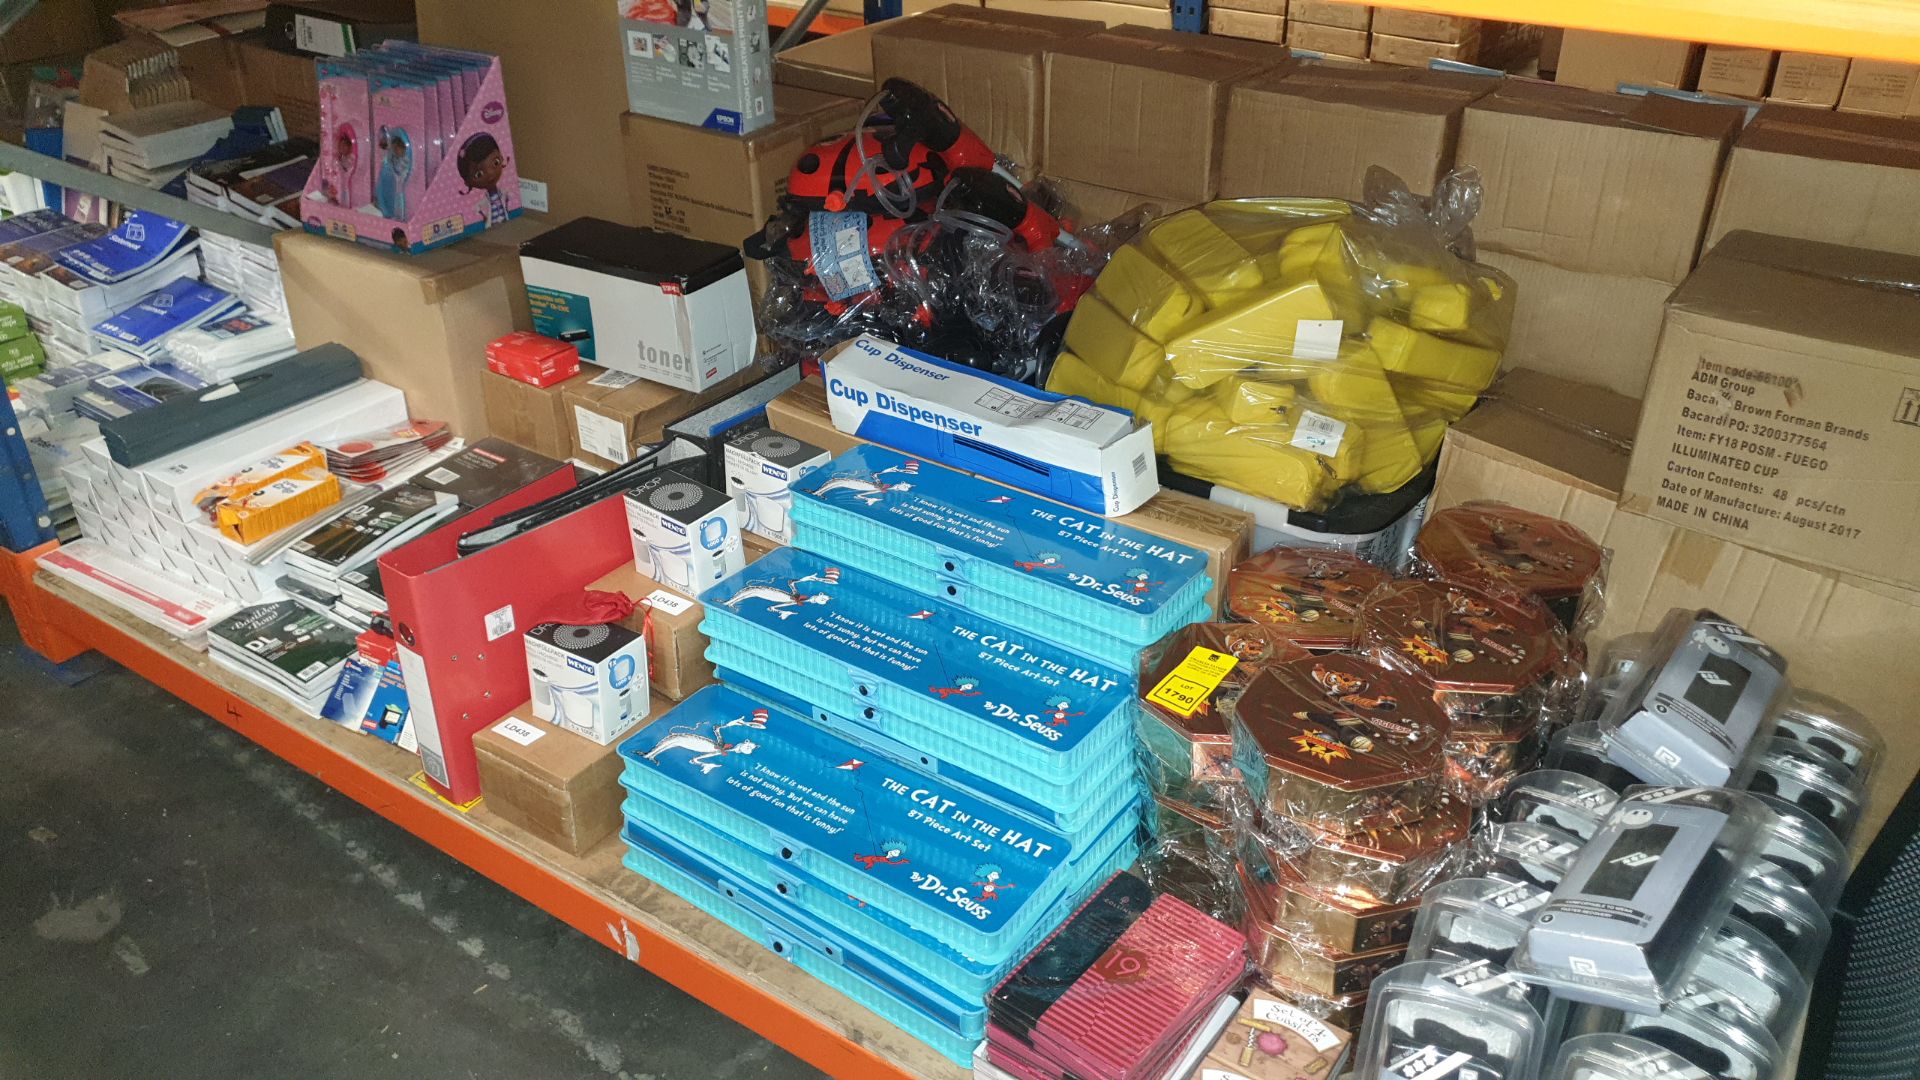 (LOT FOR THURSDAY 28TH MAY AUCTION) MISC LOT OF MAINLY STATIONERY ITEMS IN A BAY IE. A4 PAPER, PENS,